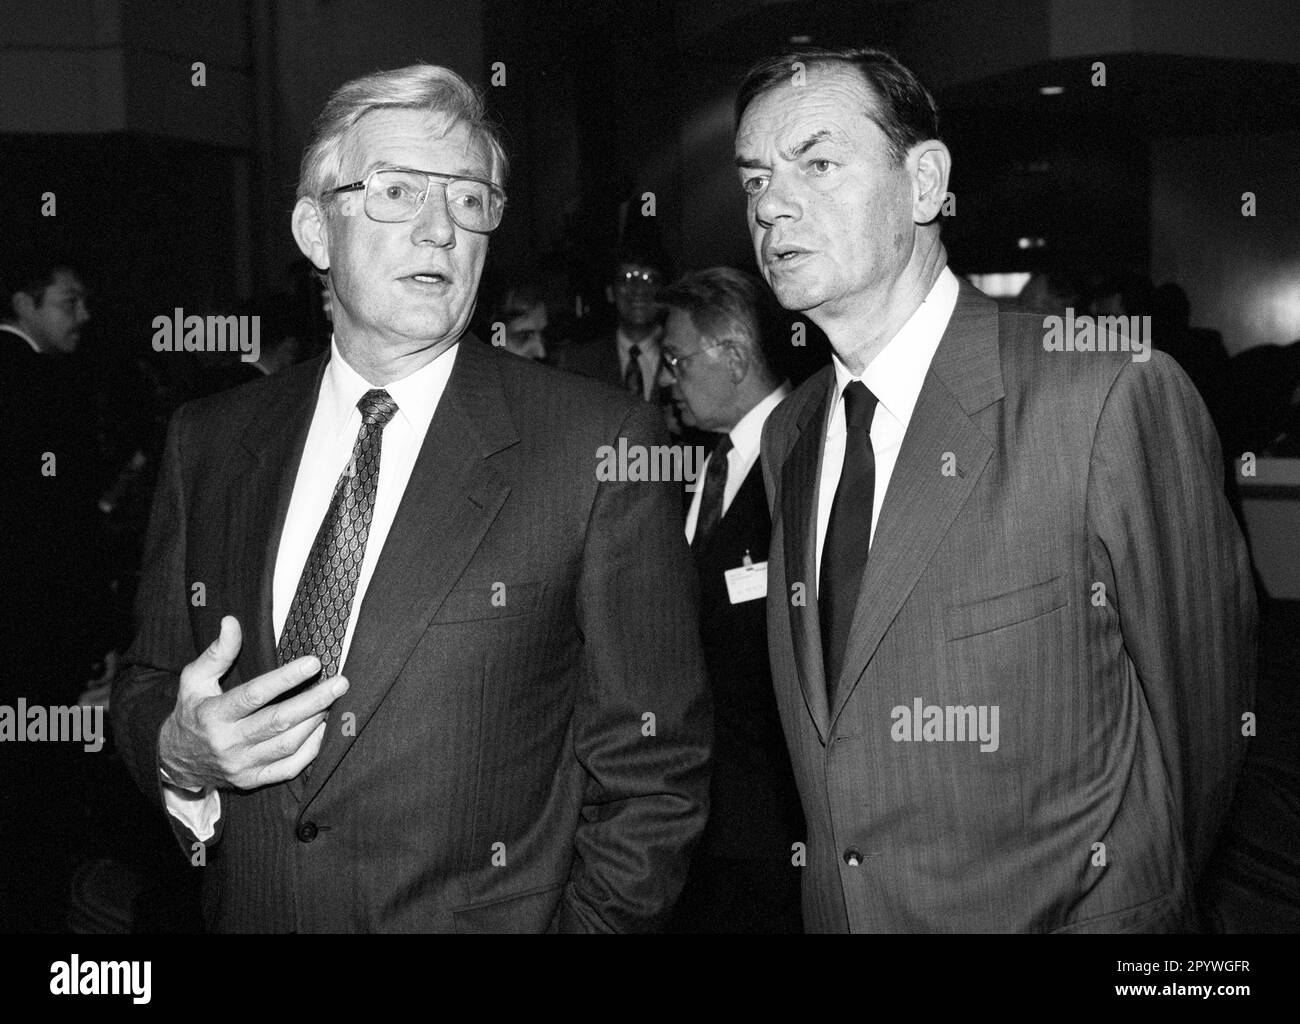 Klaus LIESEN , Chairman of the Board of Management of Ruhrgas AG , and Marcus BIERICH , Chairman of the Board of Management of Robert Bosch GmbH , October 1991 [automated translation] Stock Photo